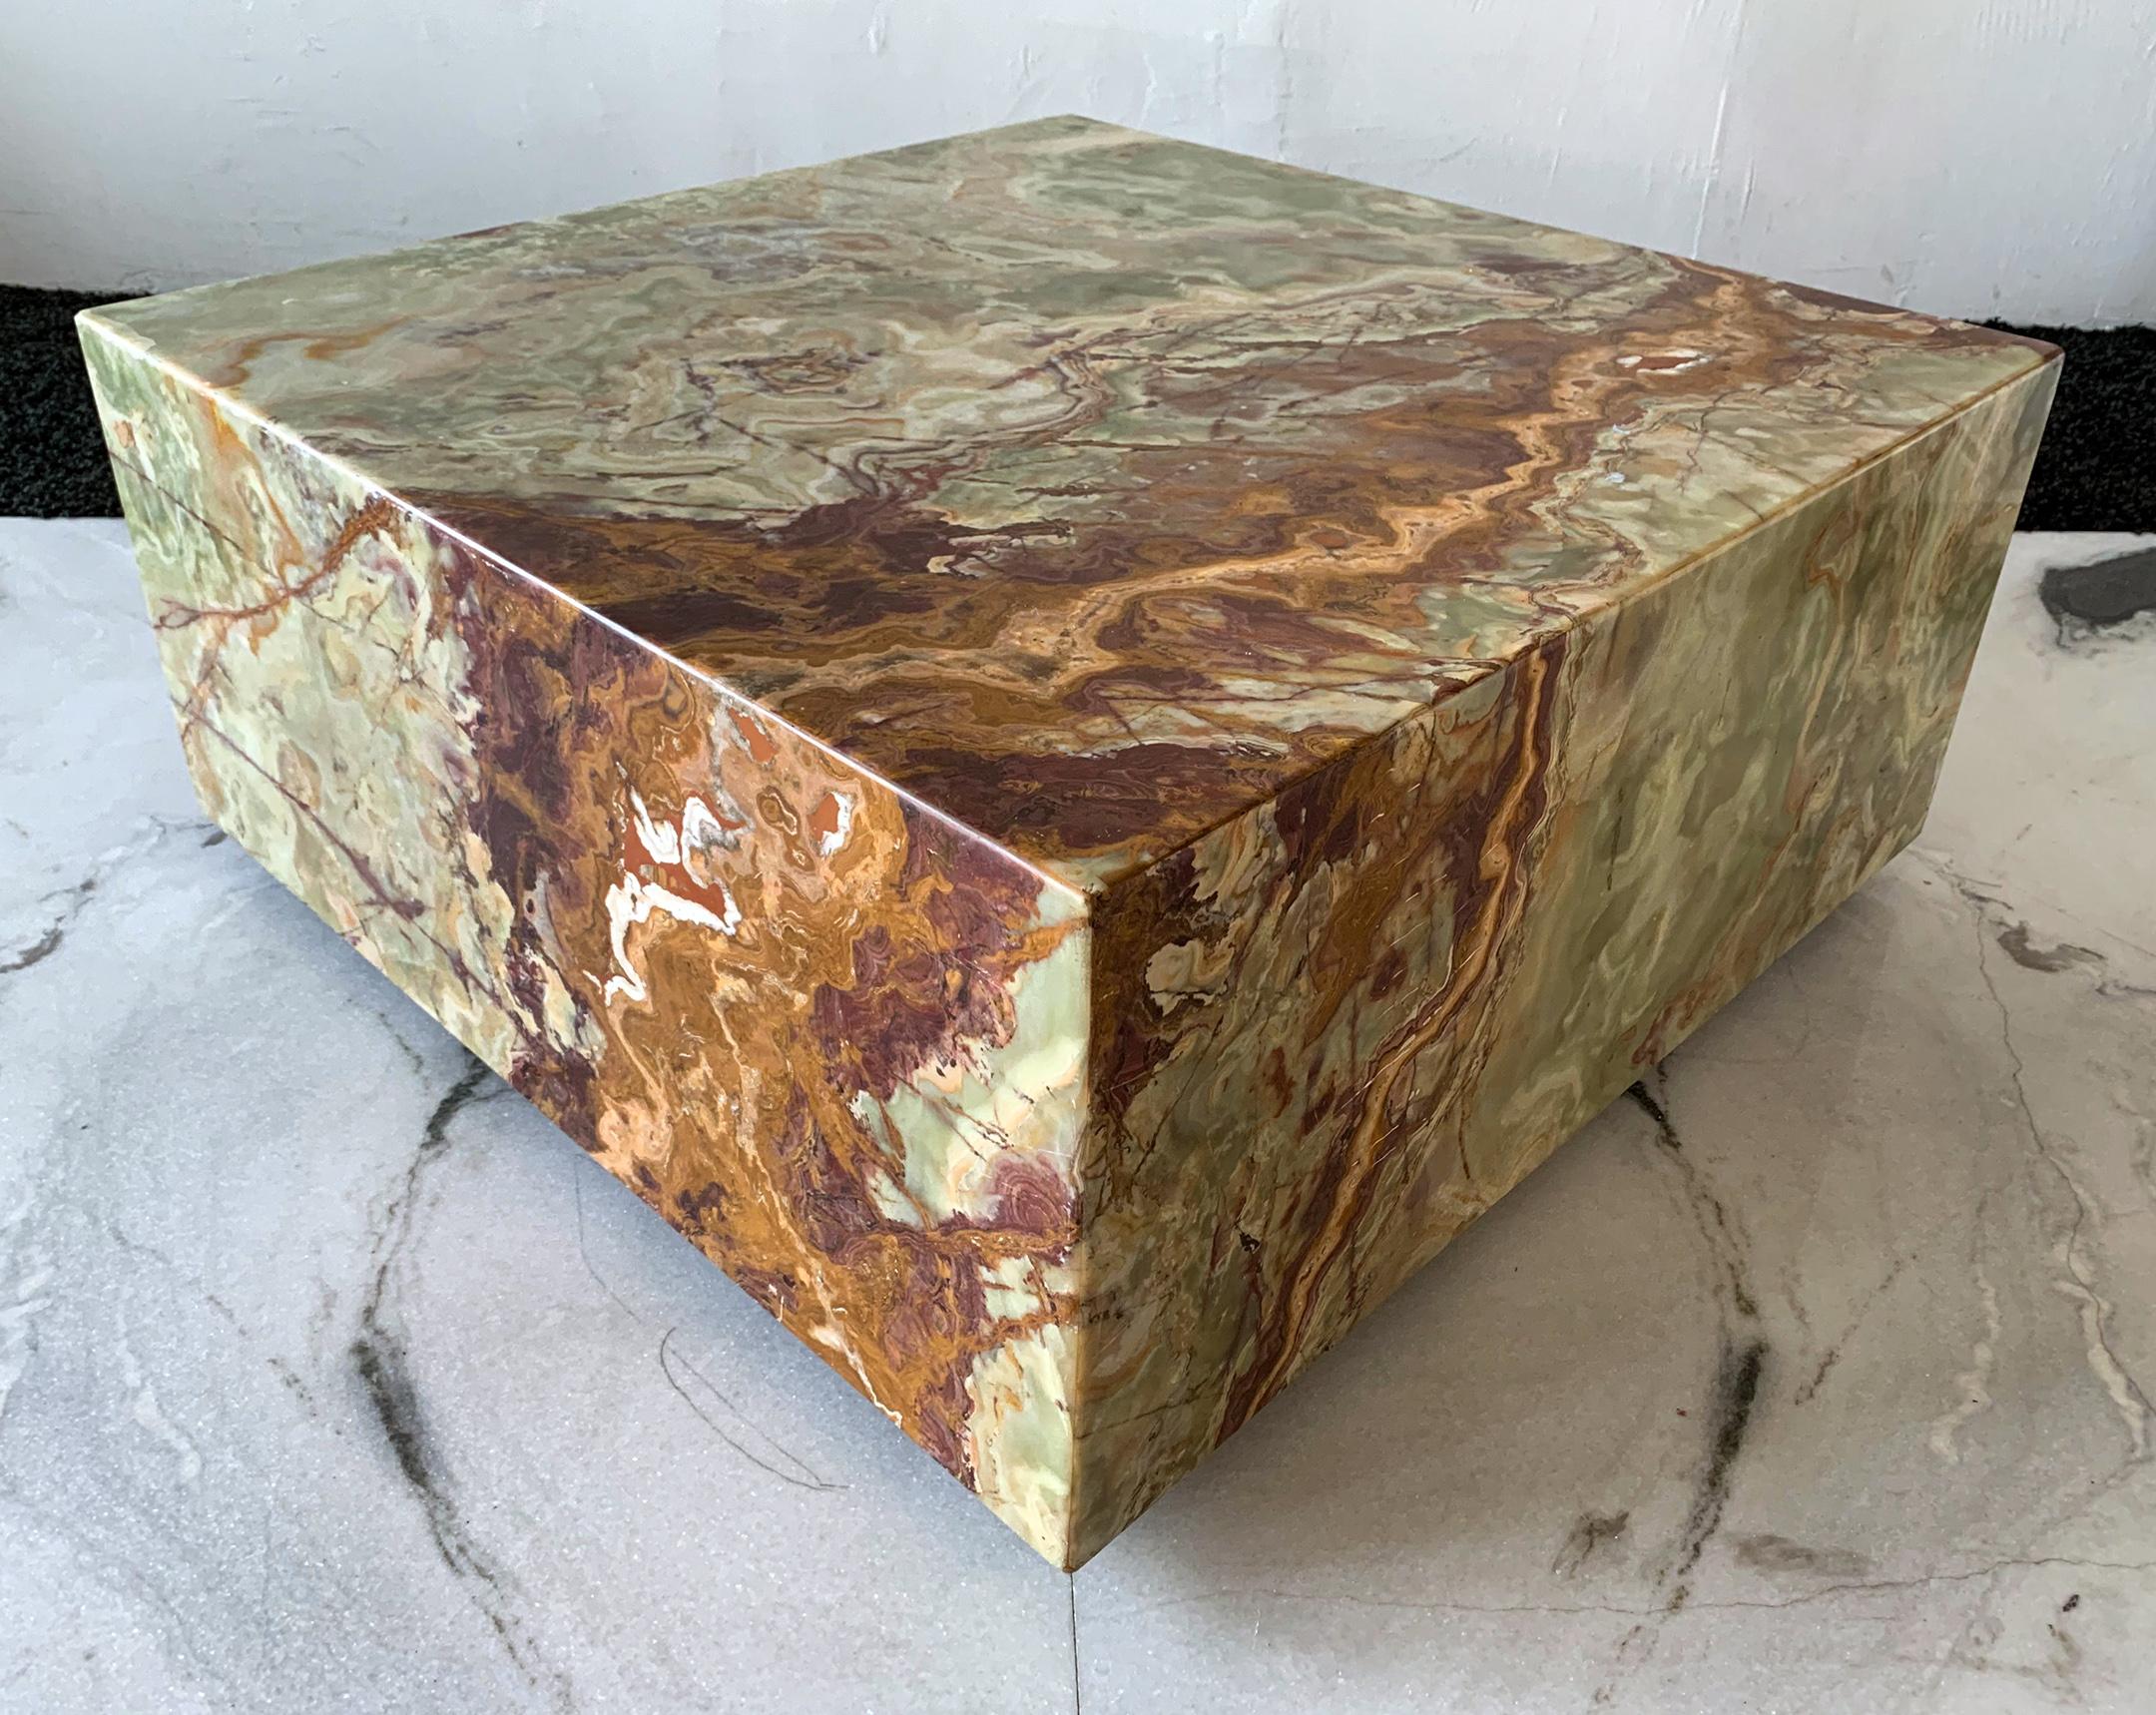 Available right now we have an absolutely stunning green onyx coffee table. This green onyx coffee table features a stunning red, white, and brown veining throughout and is simply beautiful. This square coffee table, appears to be floating on the